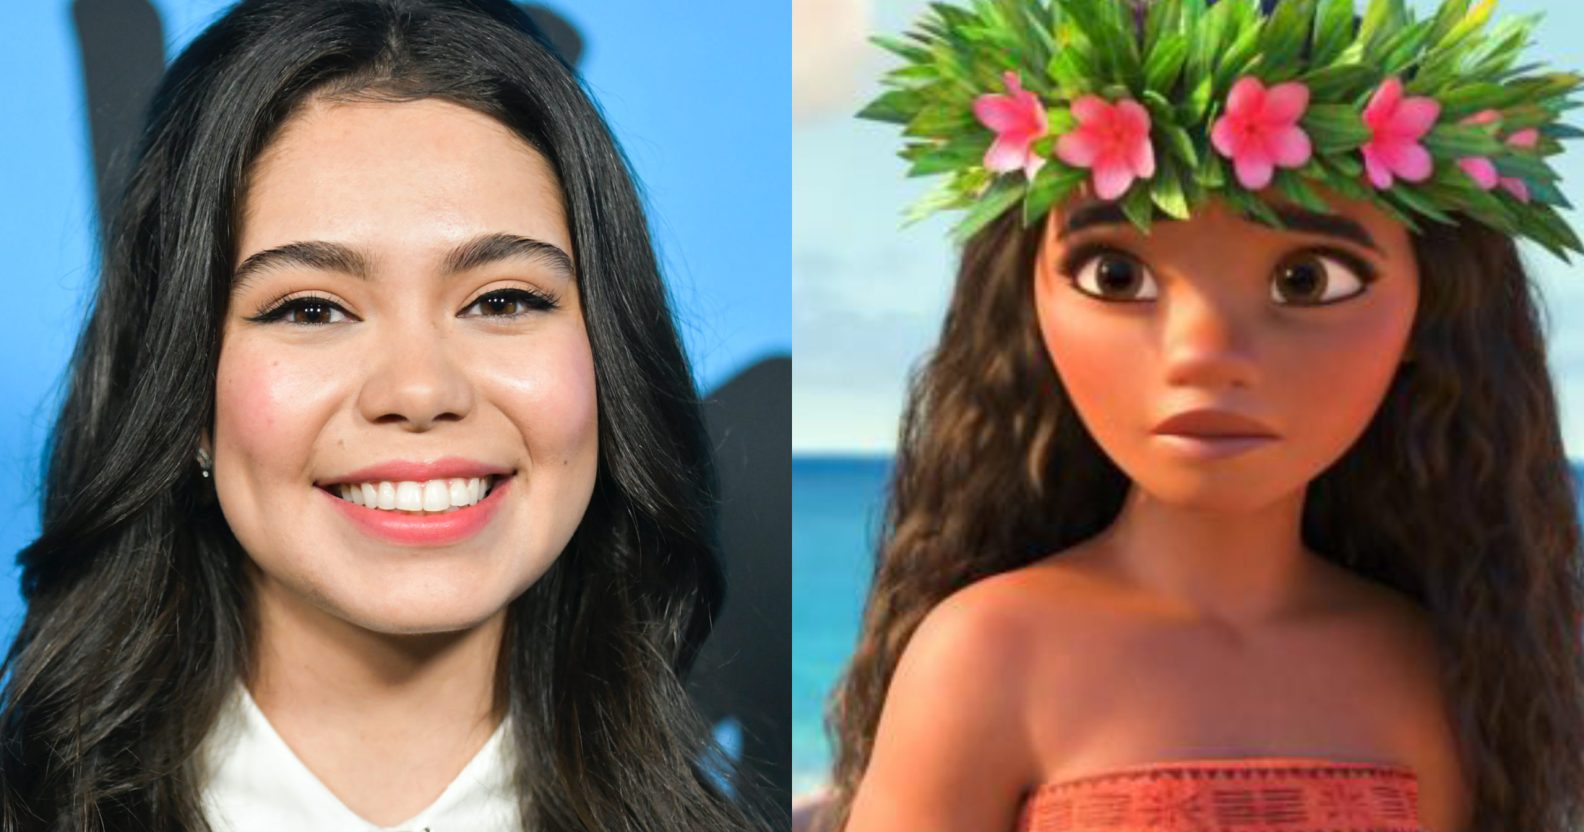 Moana star Auli’i Cravalho had girlfriends before coming out as bisexual